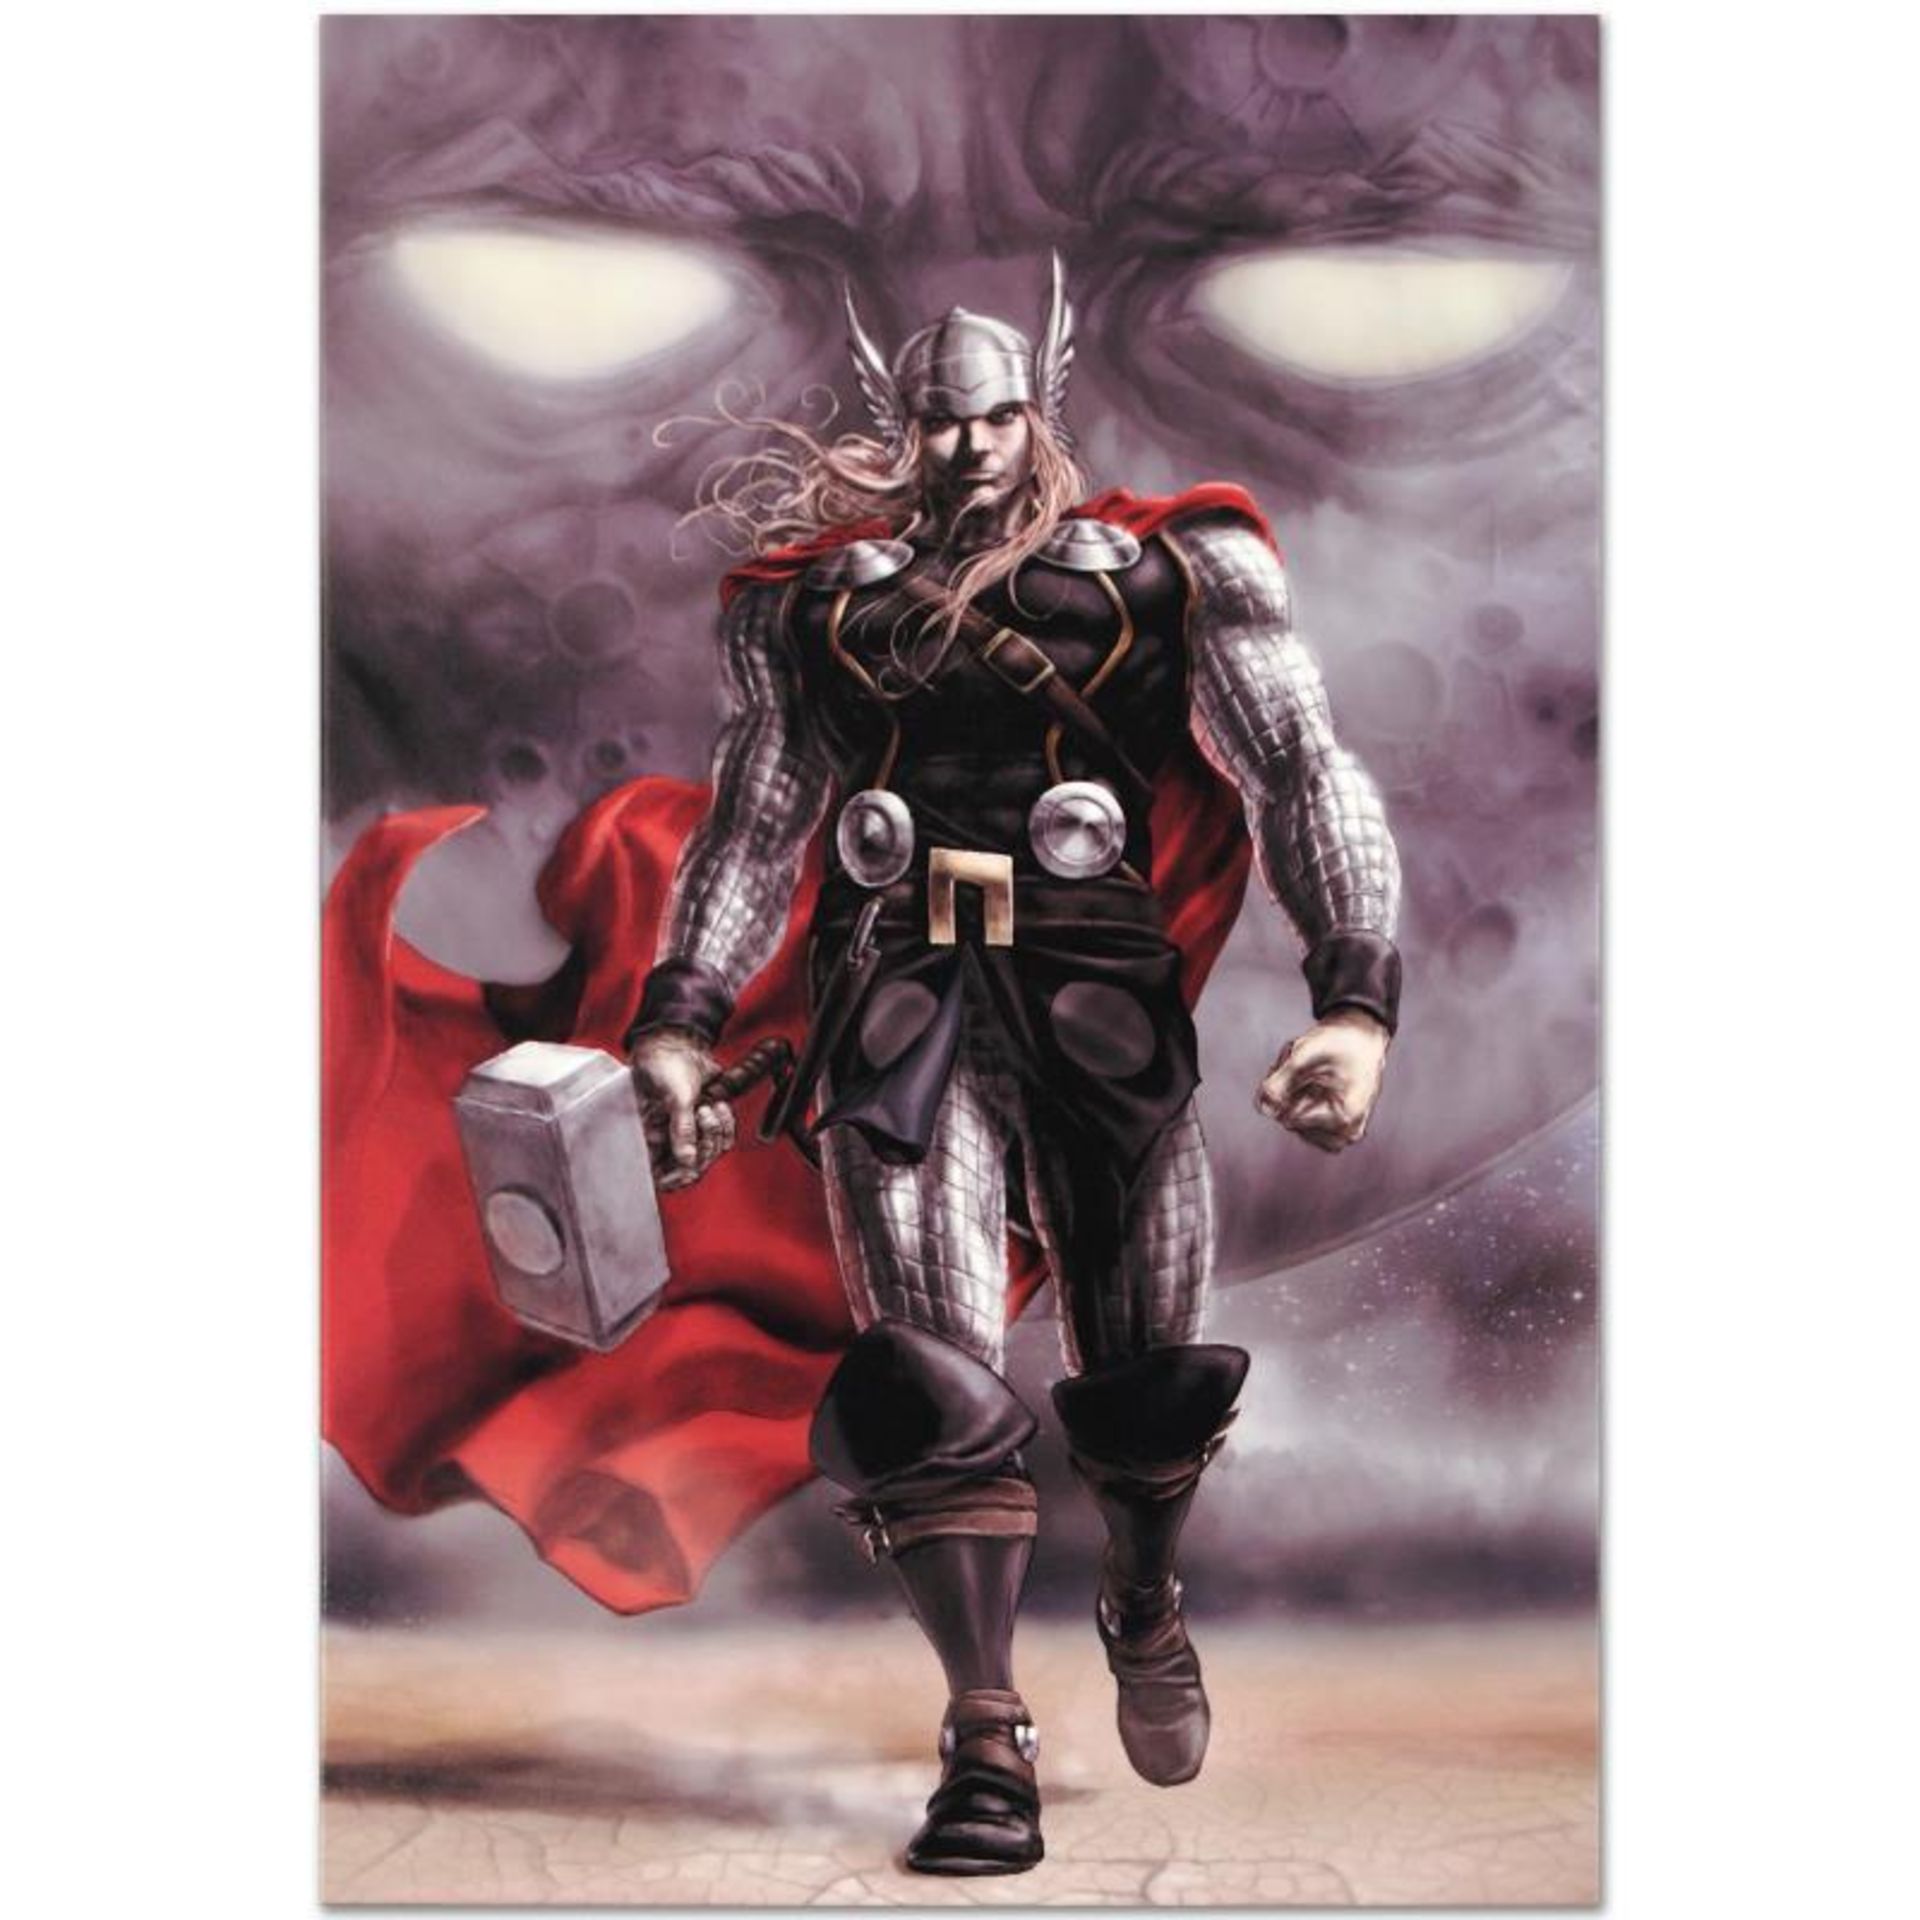 Marvel Comics "Astonishing Thor #5" Numbered Limited Edition Giclee on Canvas by